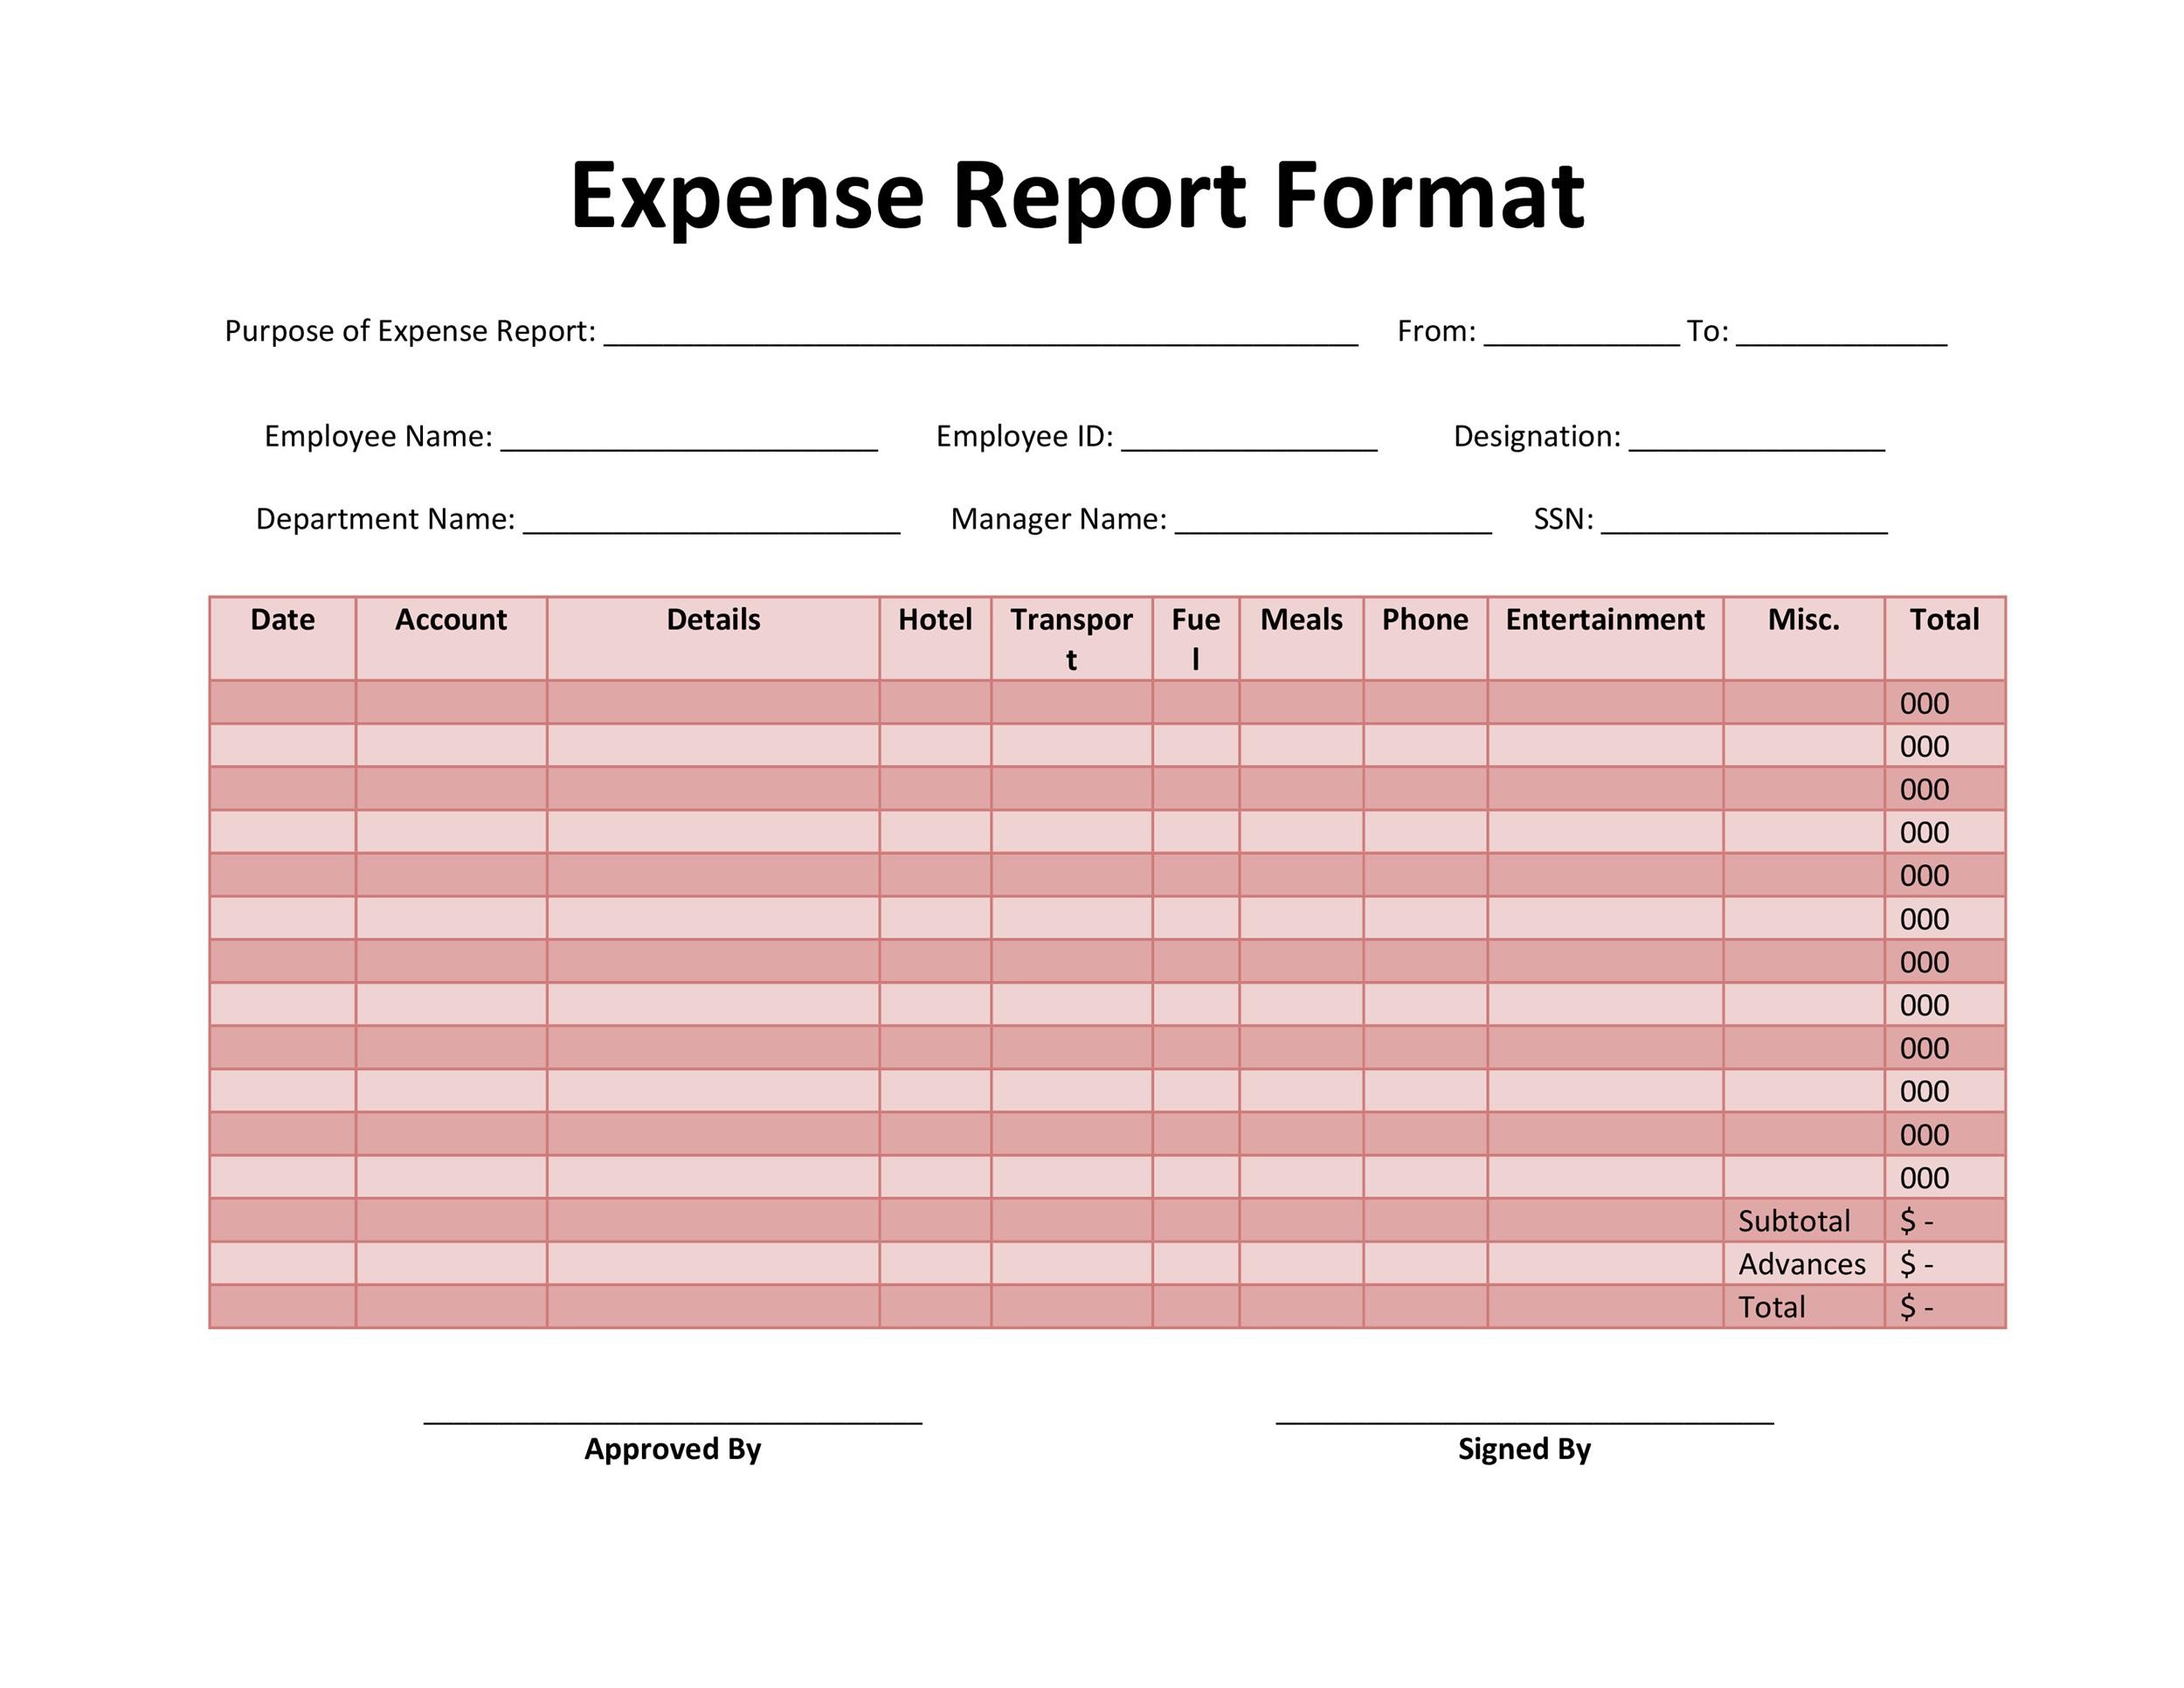 Expense Form Excel | 40+ Expense Report Templates to Help you Save